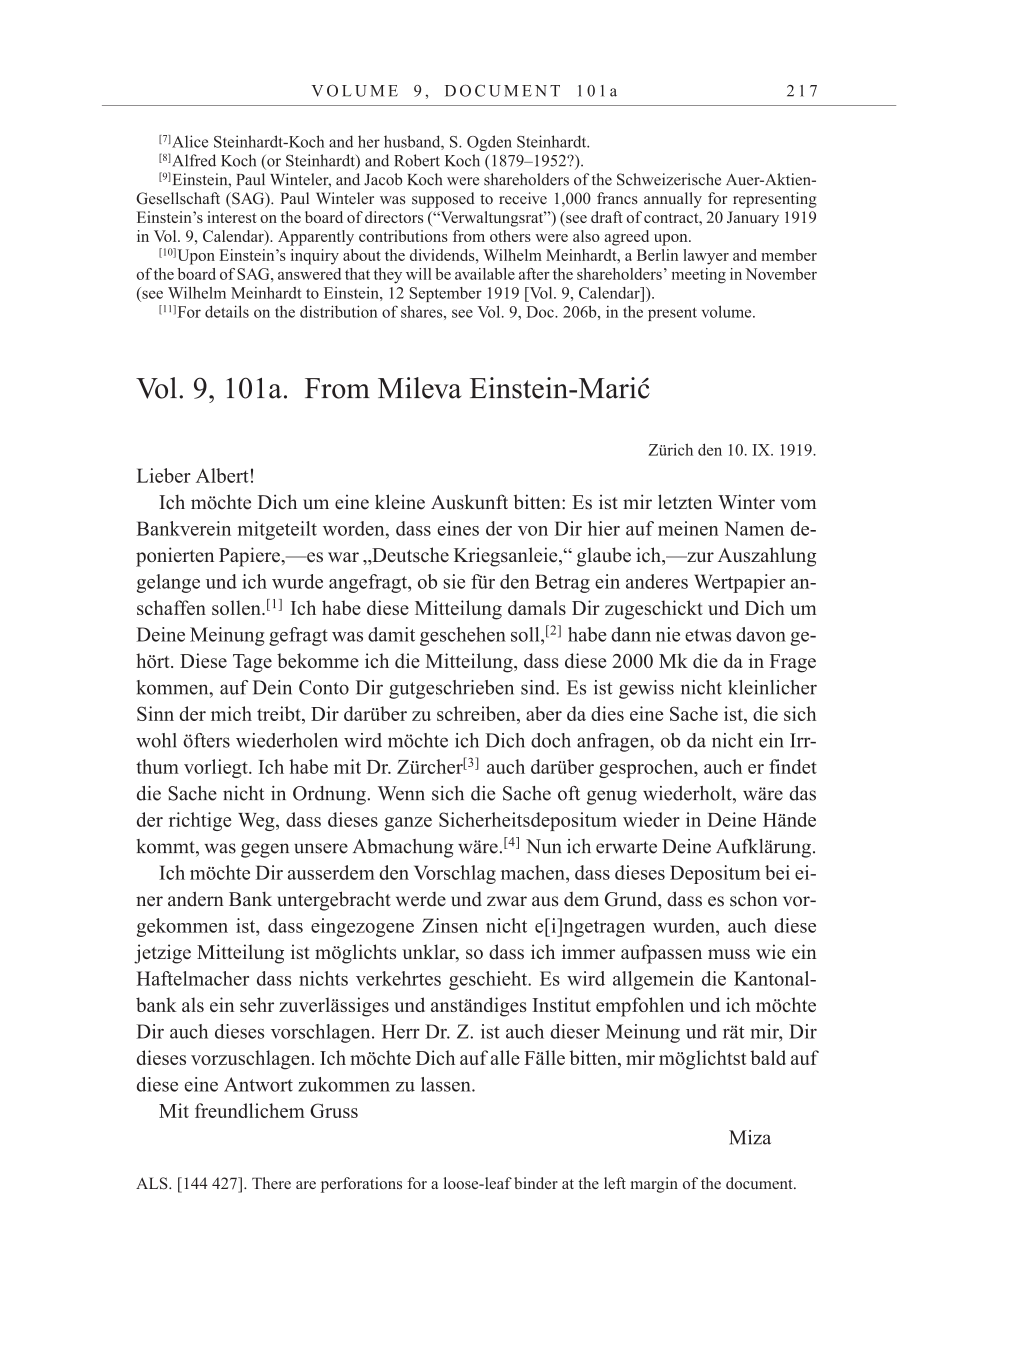 Volume 10: The Berlin Years: Correspondence May-December 1920 / Supplementary Correspondence 1909-1920 page 217